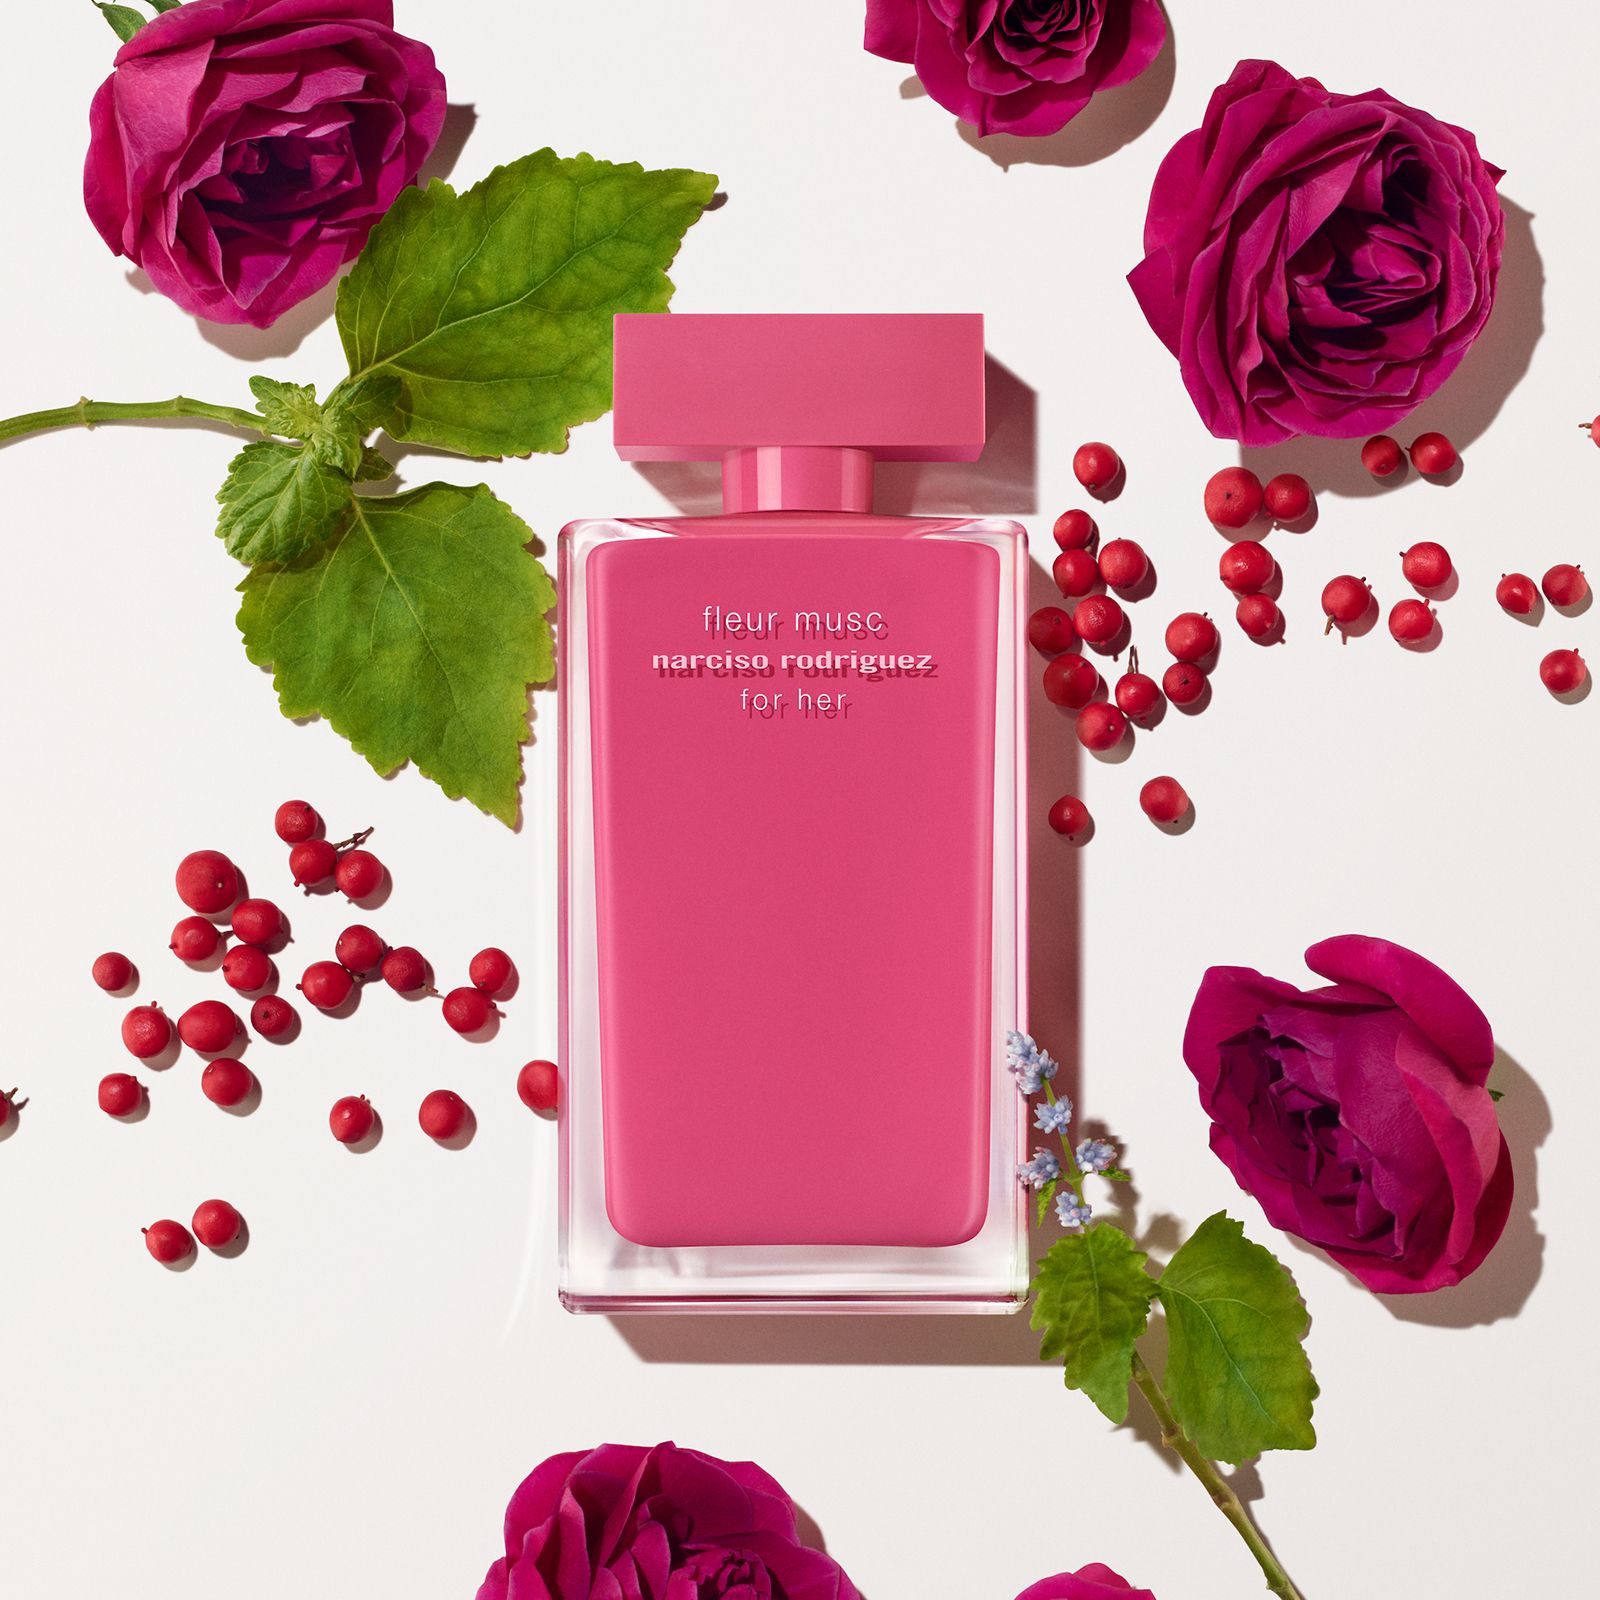 Родригес флер. Narciso Rodriguez for her fleur Musc EDP 100ml. Narciso Rodriguez fleur Musc 100 мл. Narciso Rodriguez for her fleur Musc EDP 50ml. Духи fleur Musc Narciso Rodriguez for her.